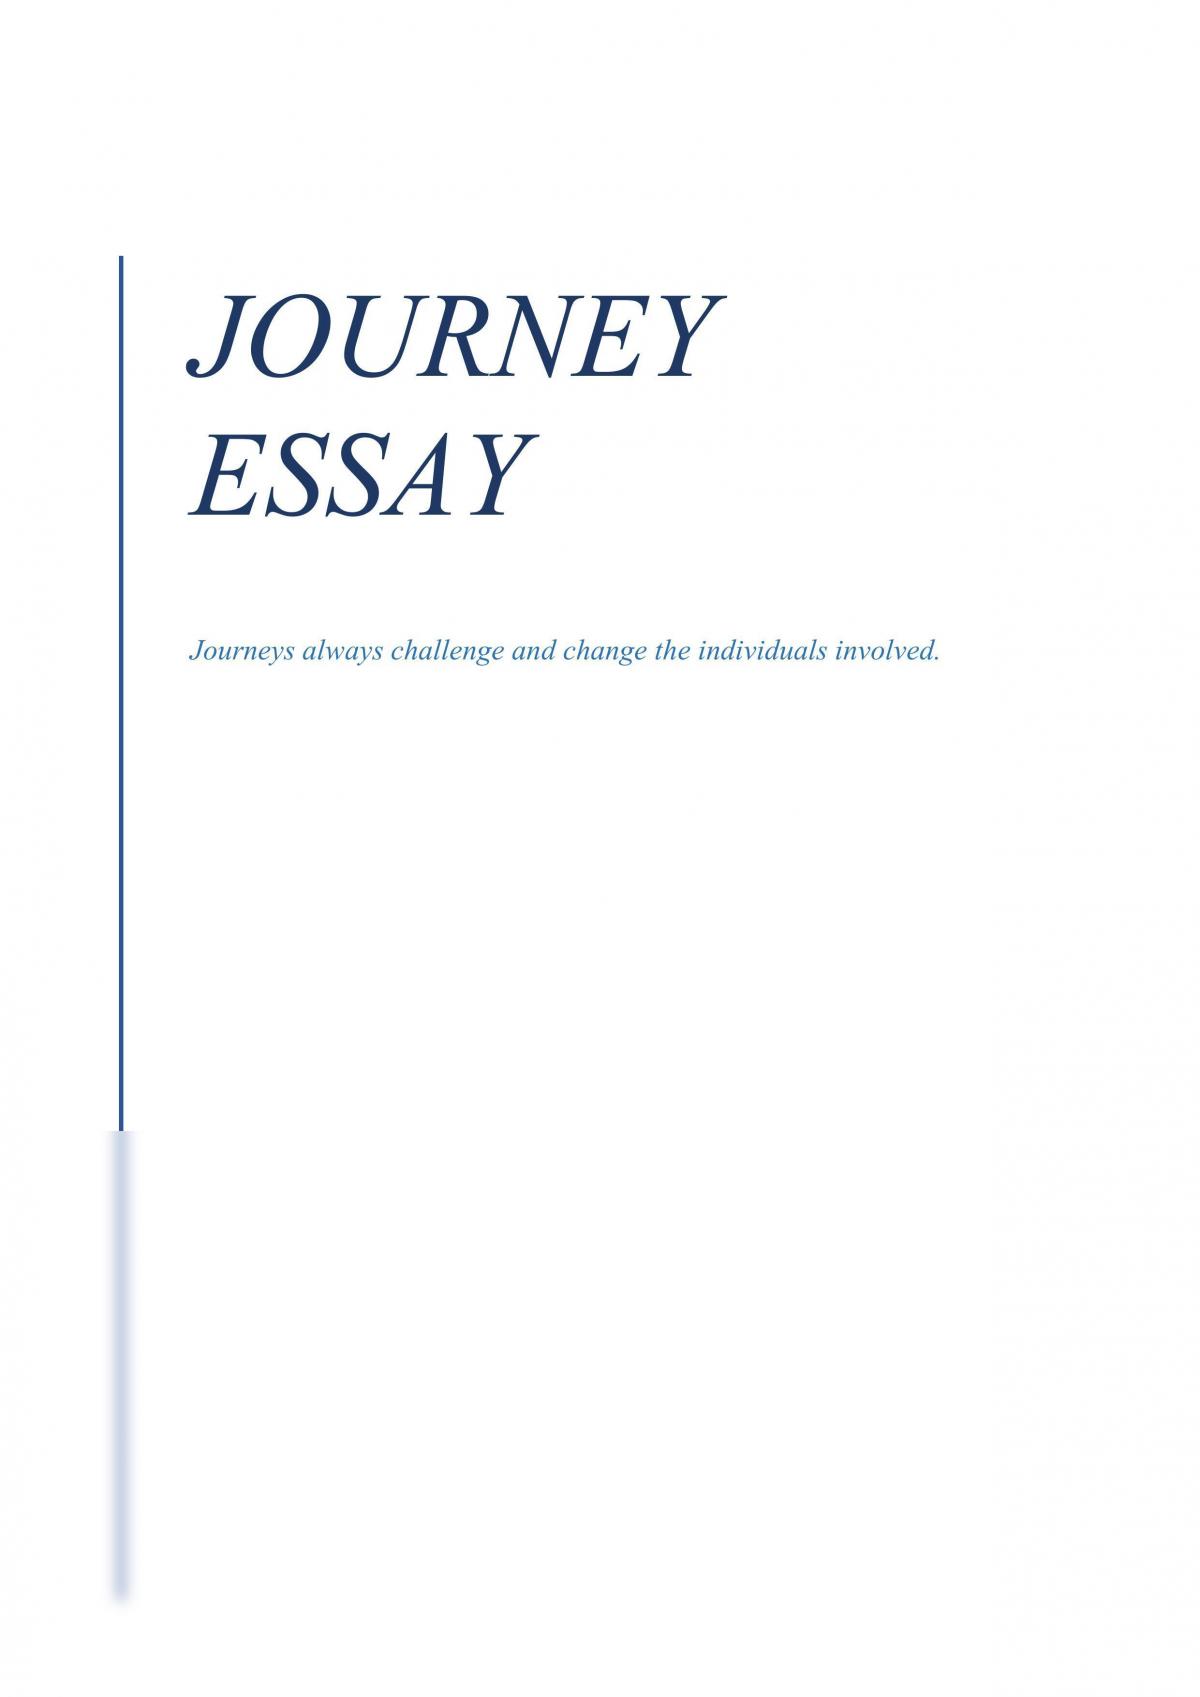 essay about your journey